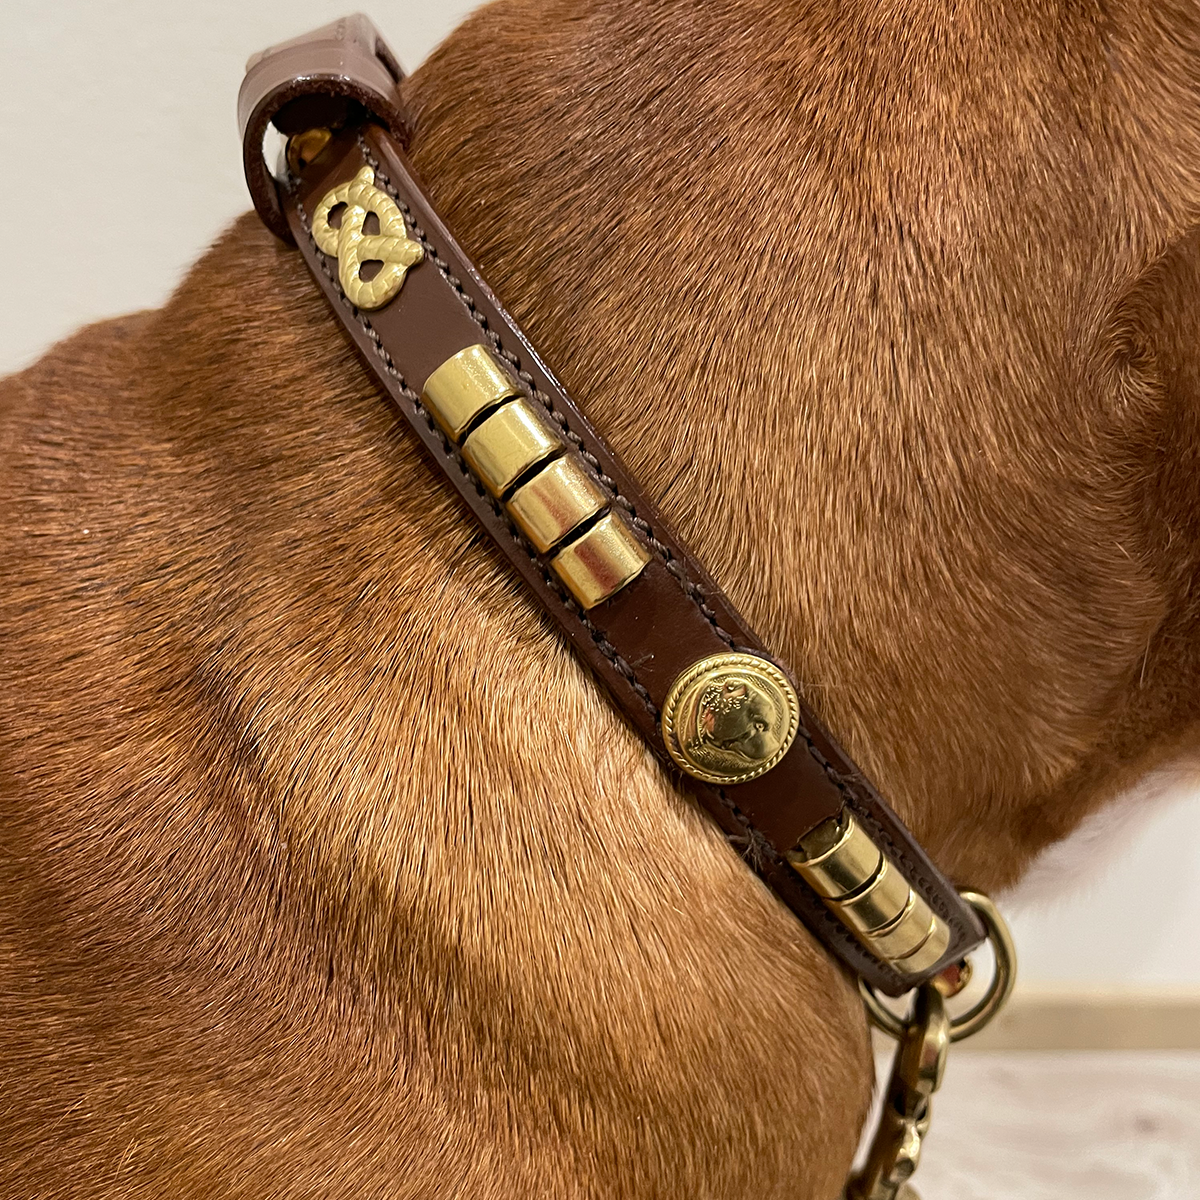 Staffordshire Bull Terrier show collar and leash showset